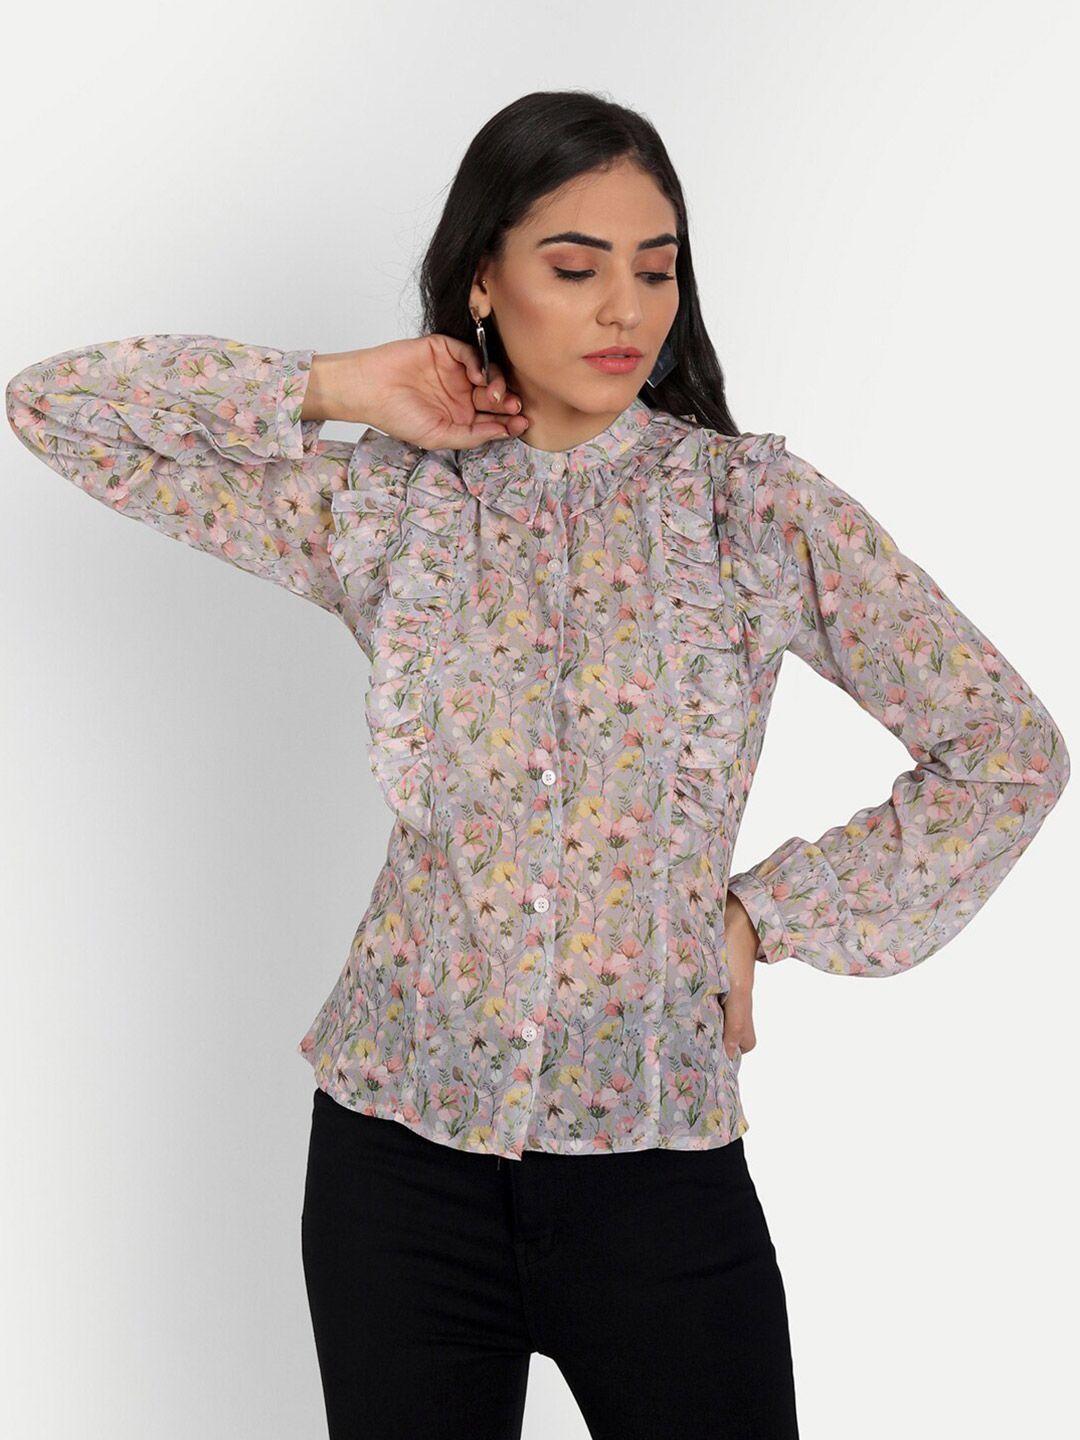 masakali co off white & pink floral print georgette shirt style top